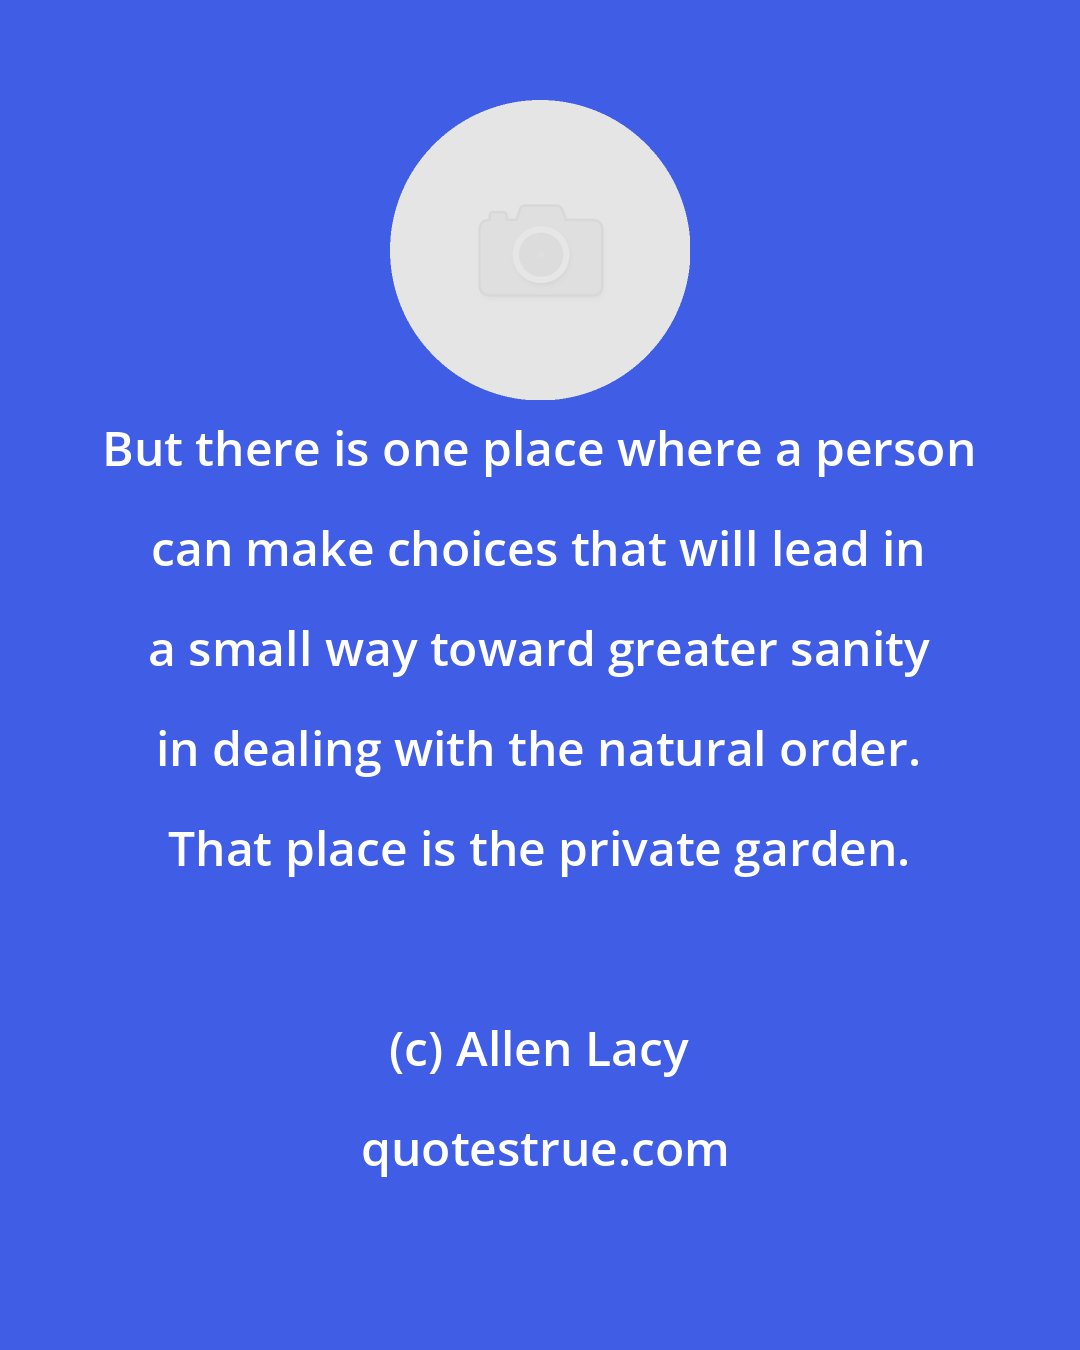 Allen Lacy: But there is one place where a person can make choices that will lead in a small way toward greater sanity in dealing with the natural order. That place is the private garden.